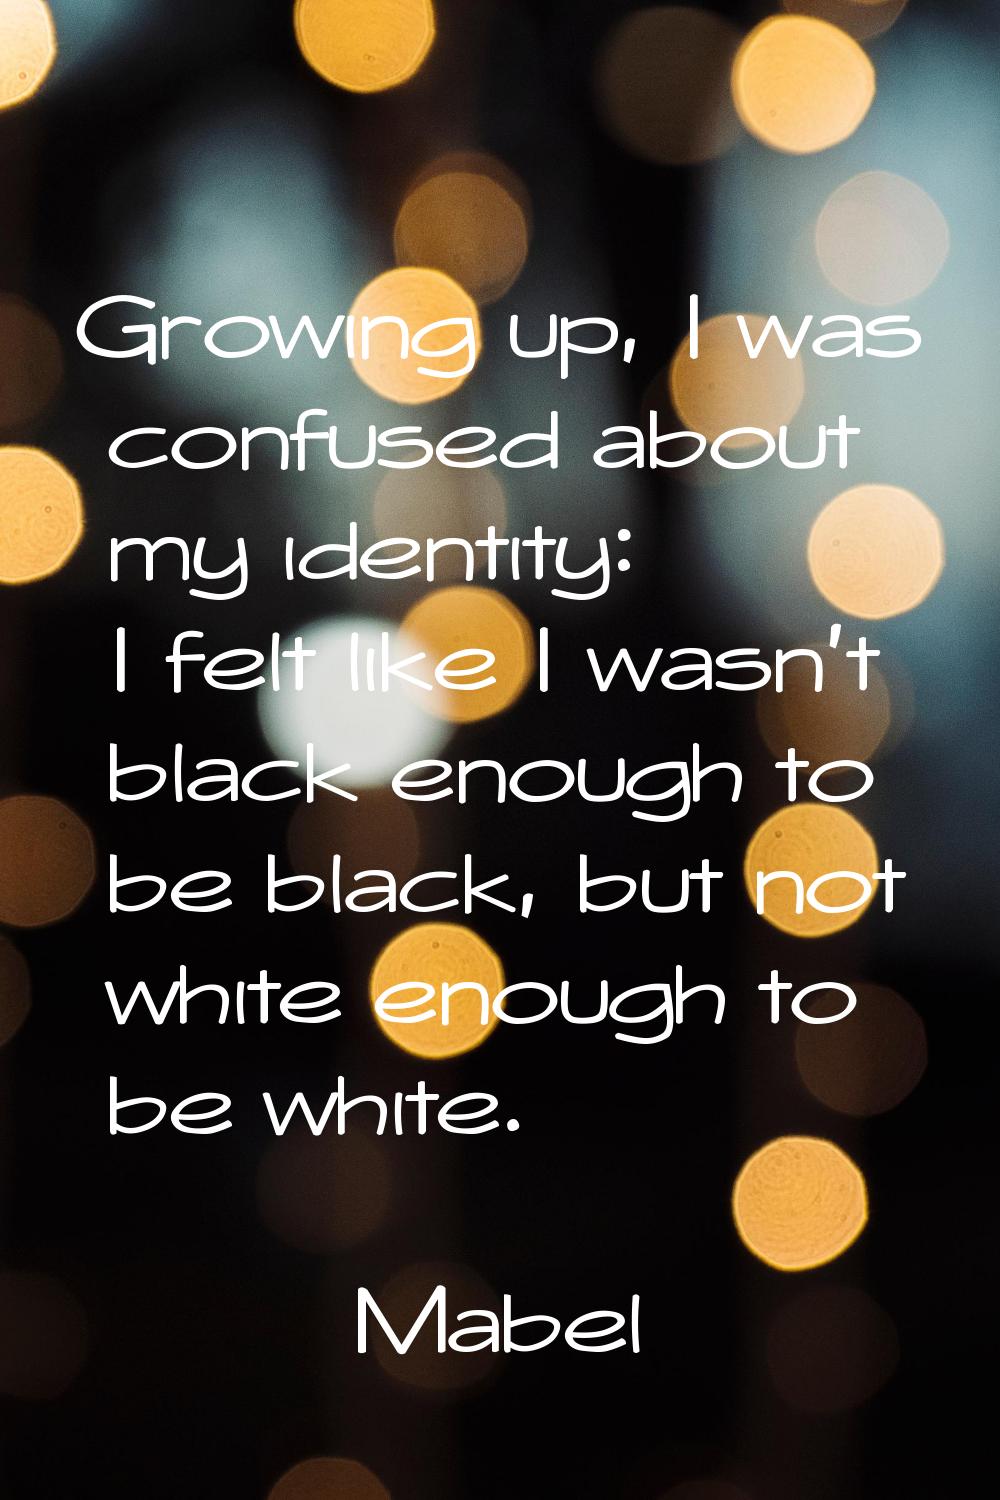 Growing up, I was confused about my identity: I felt like I wasn't black enough to be black, but no